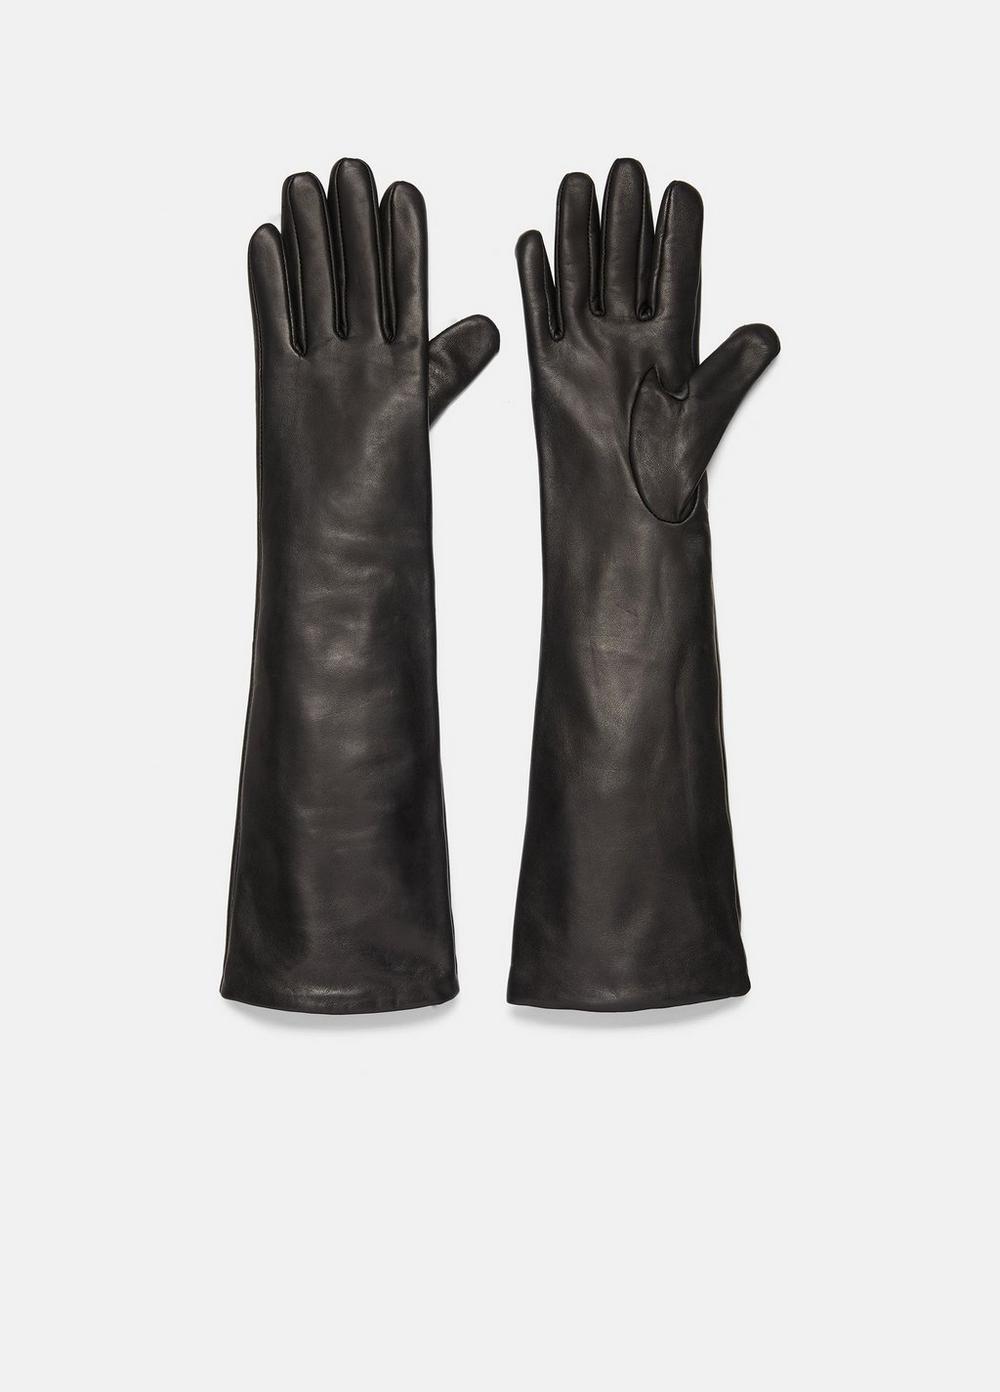 Cashmere-Lined Long Leather Glove, Black, Size S Vince